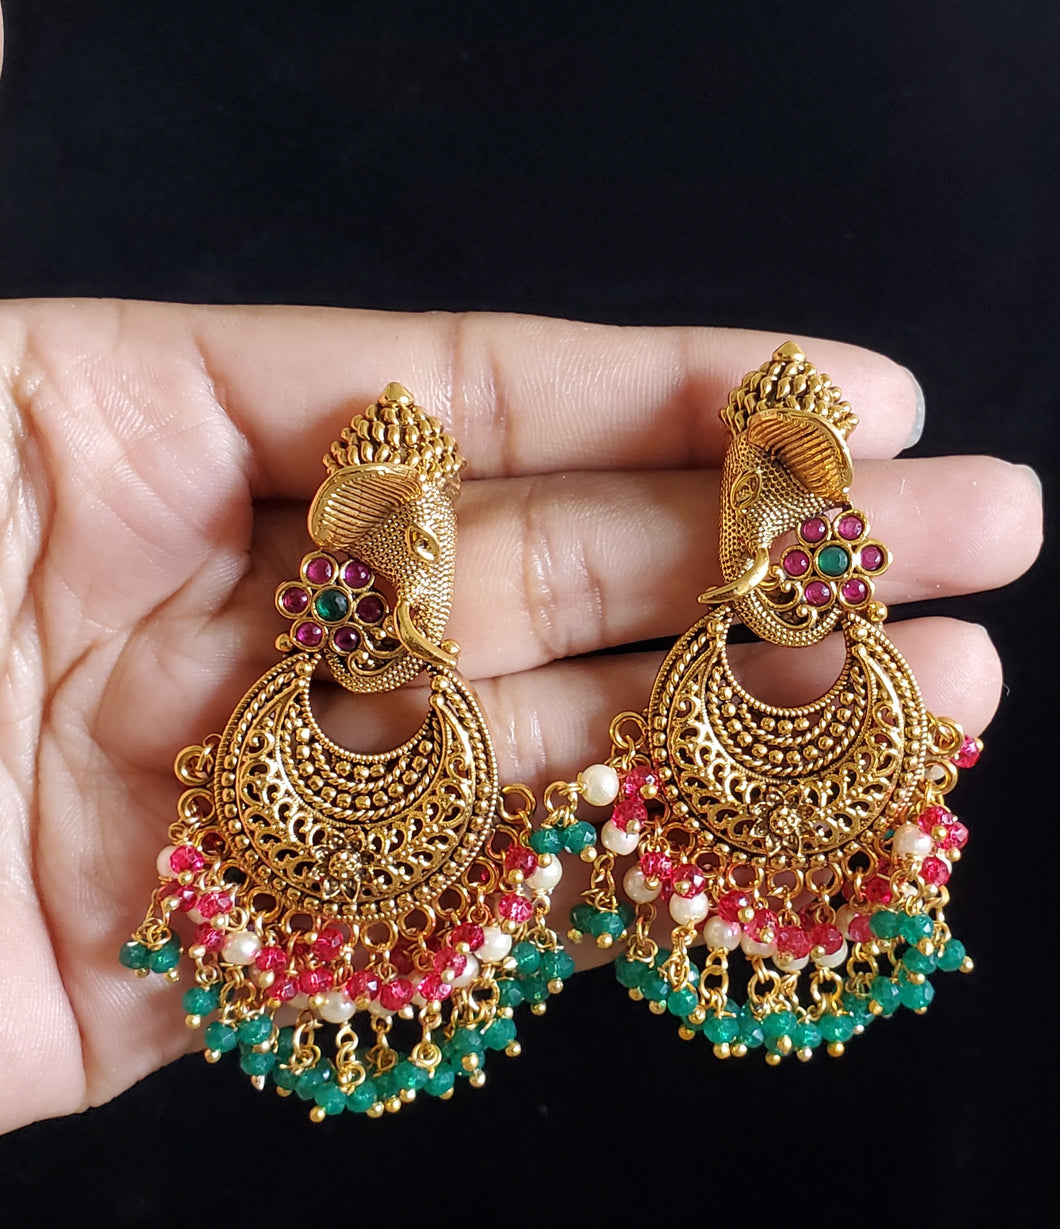 Sowmya Ch, Kavitha B and Bhunesh K Antique Temple Earring With Gold Plating Multi H30